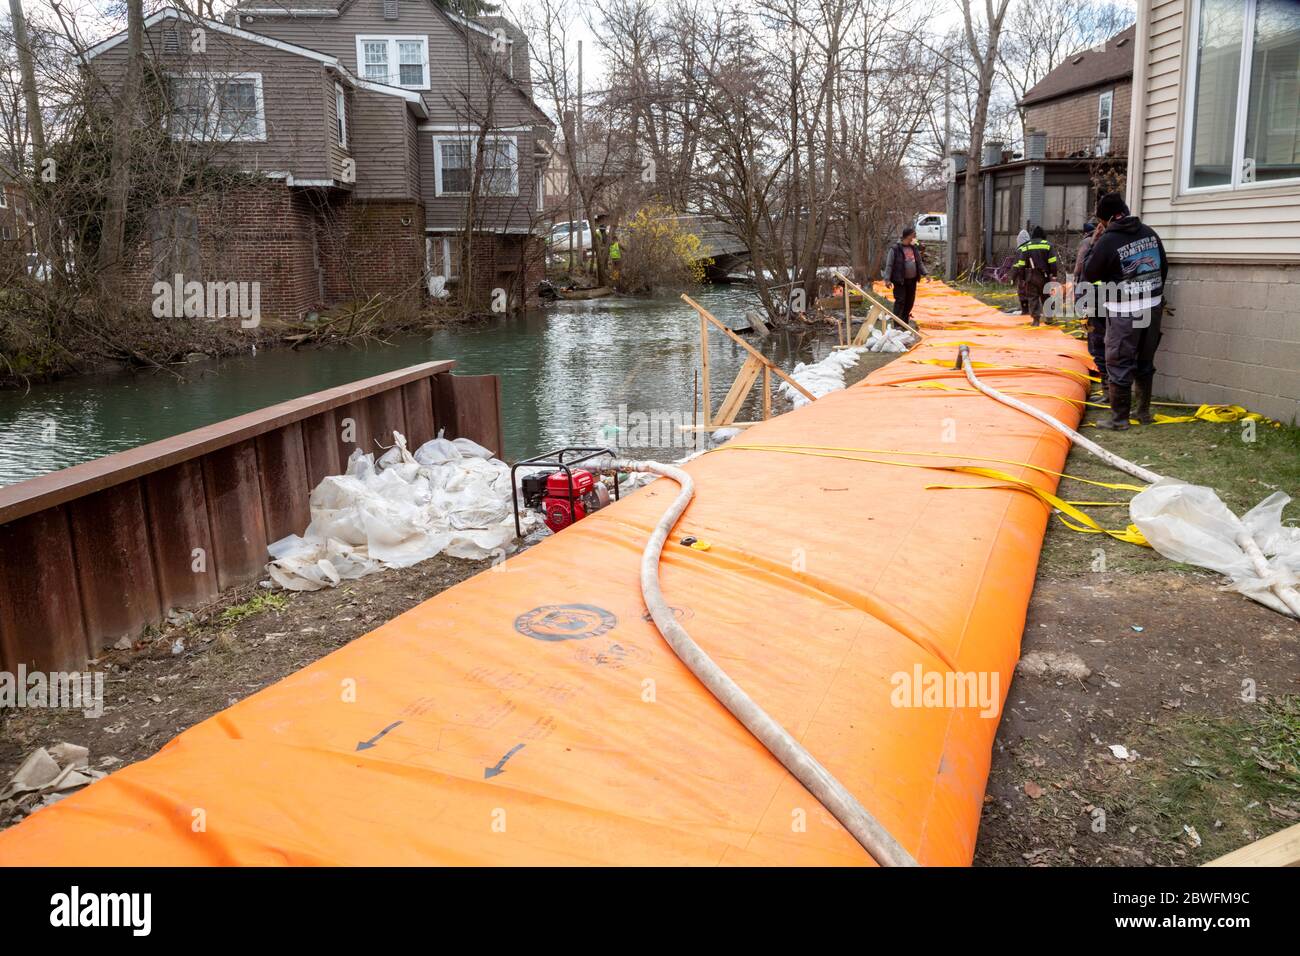 Detroit, Michigan - The city has installed orange flood control barriers around the canals on the city's east side to protect homes from flooding expe Stock Photo